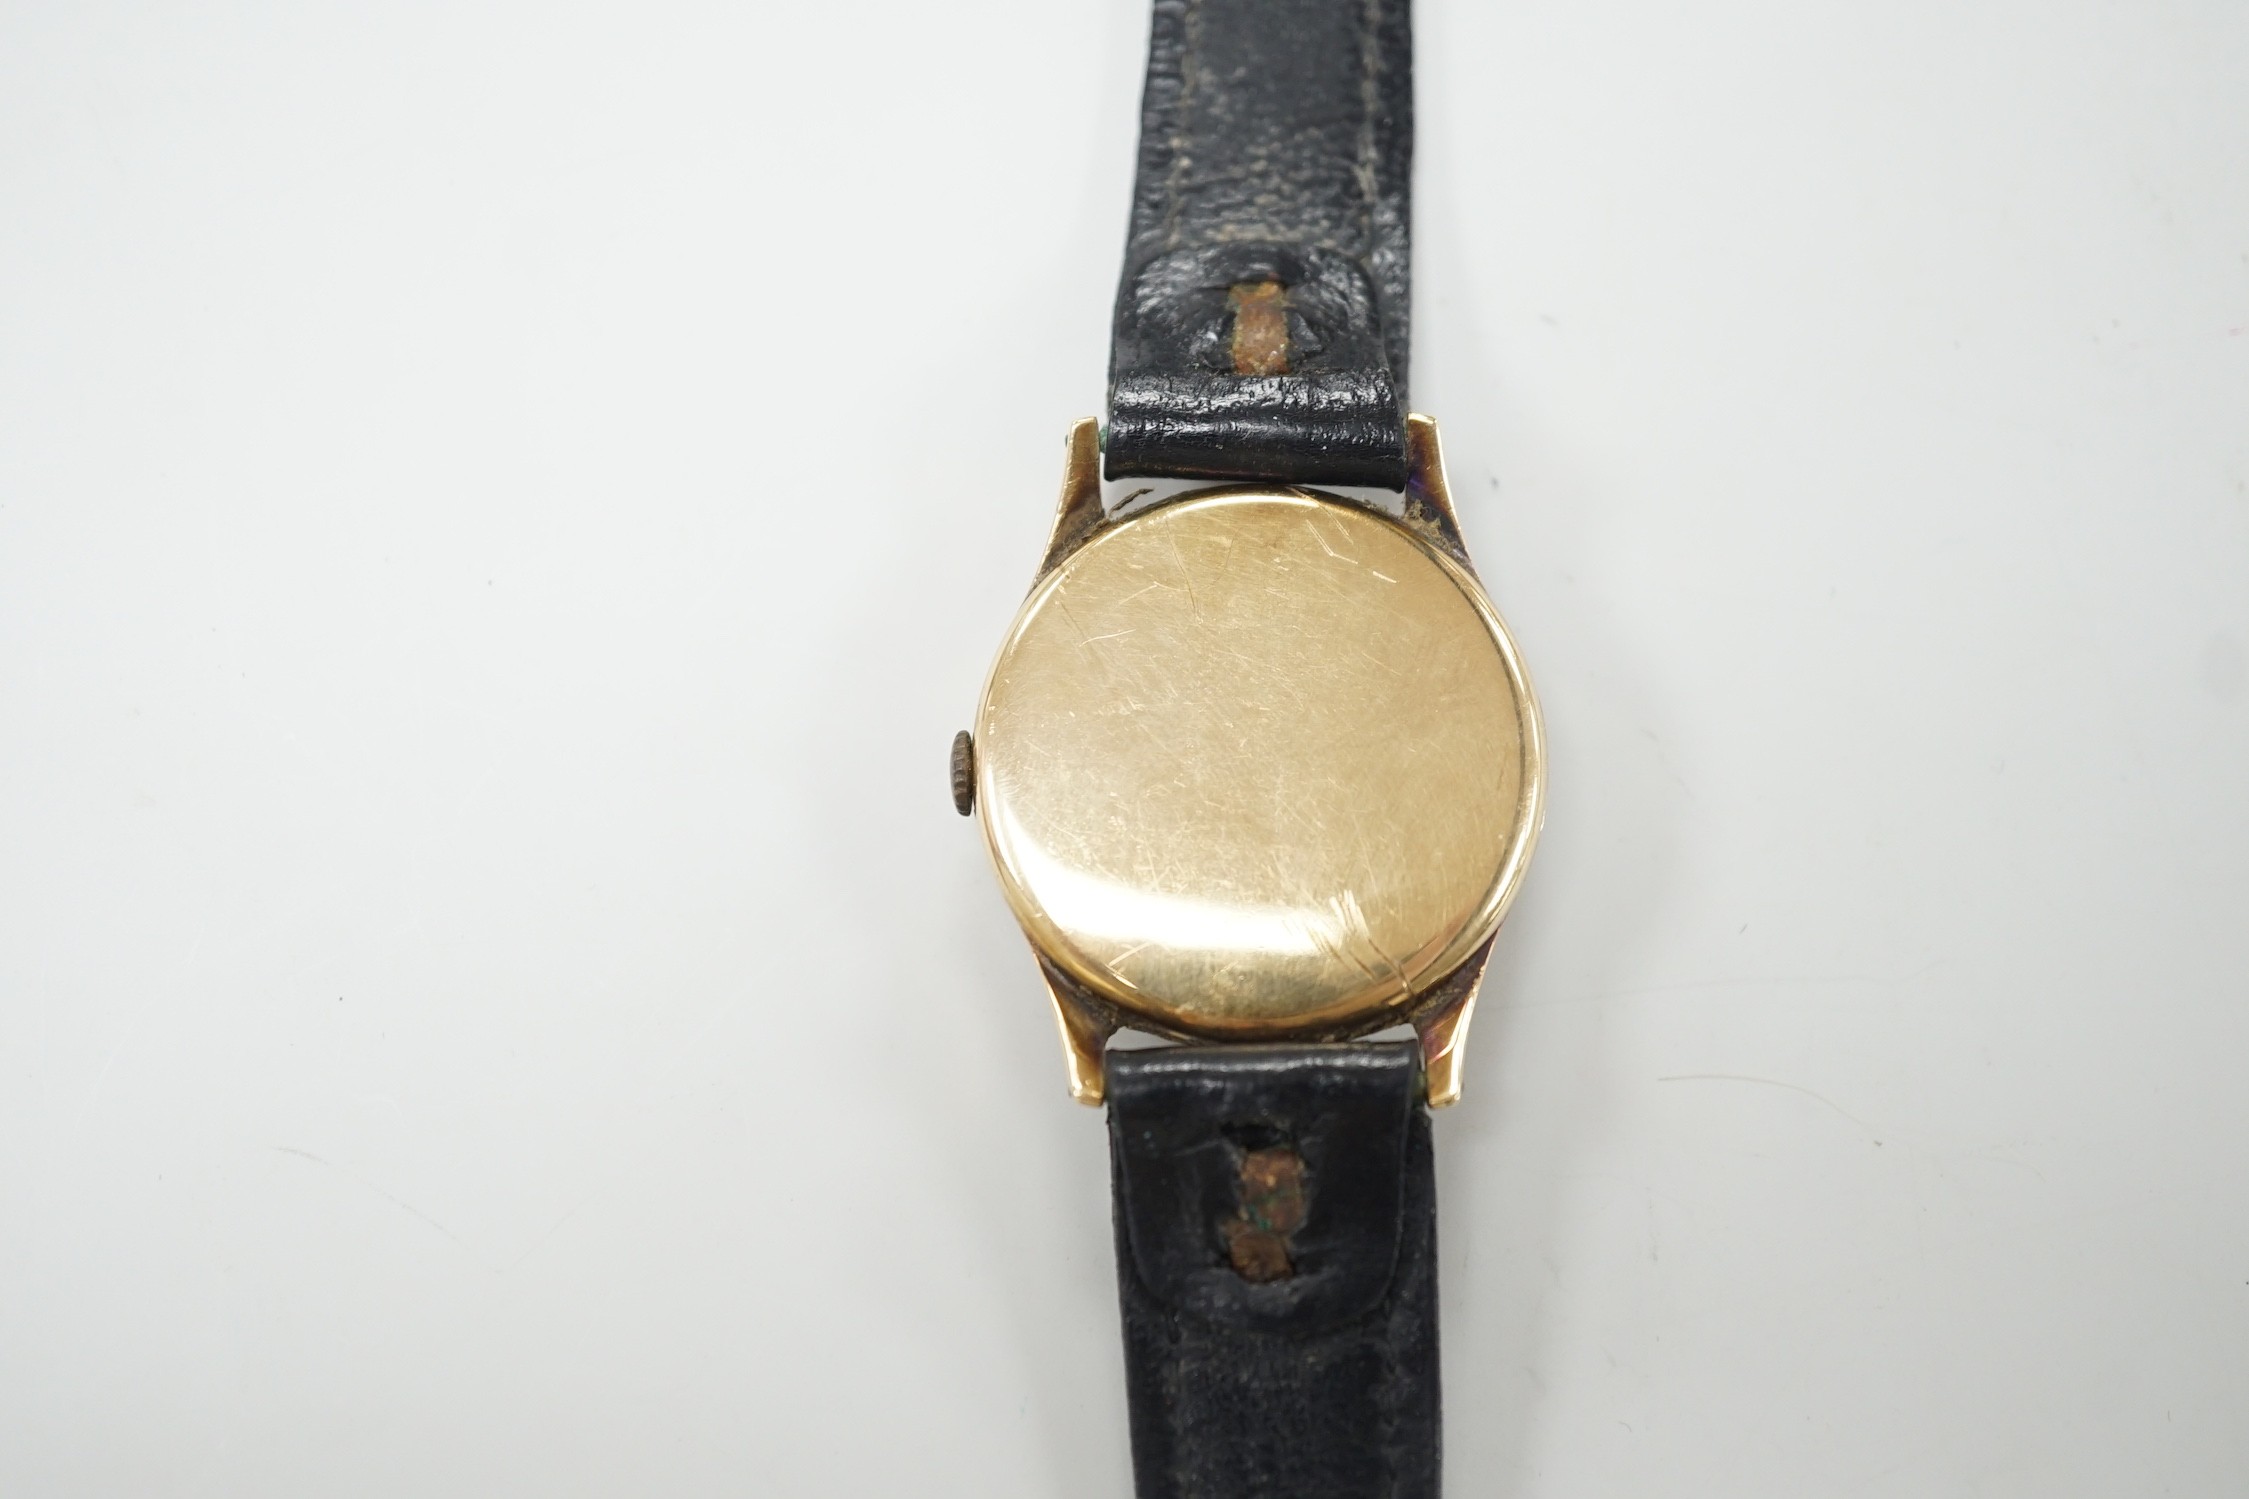 A gentleman's 1950's 9ct gold Omega manual wind wrist watch, movement c.265, case diameter 34mm, on later associated leather strap.